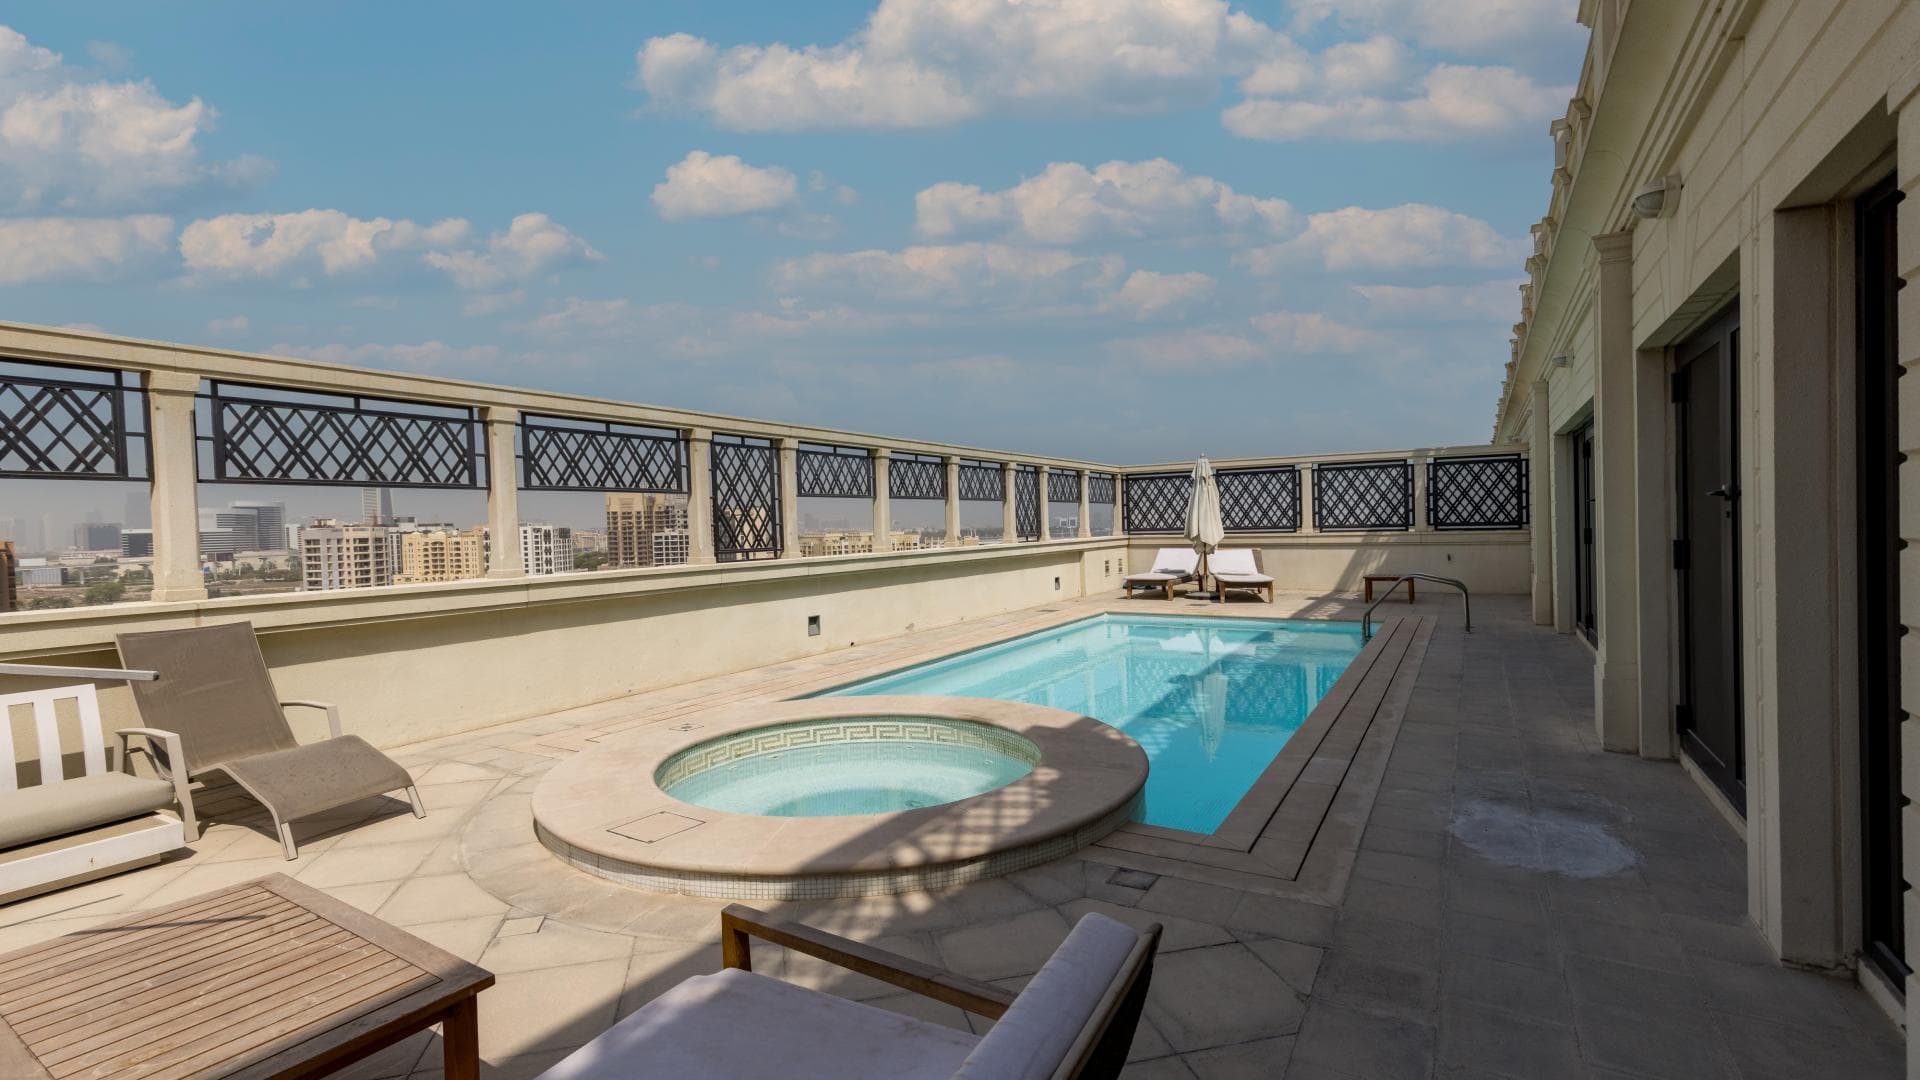 4 Bedroom Penthouse For Rent Palazzo Versace Lp14406 18a4d42747567e00.jpg